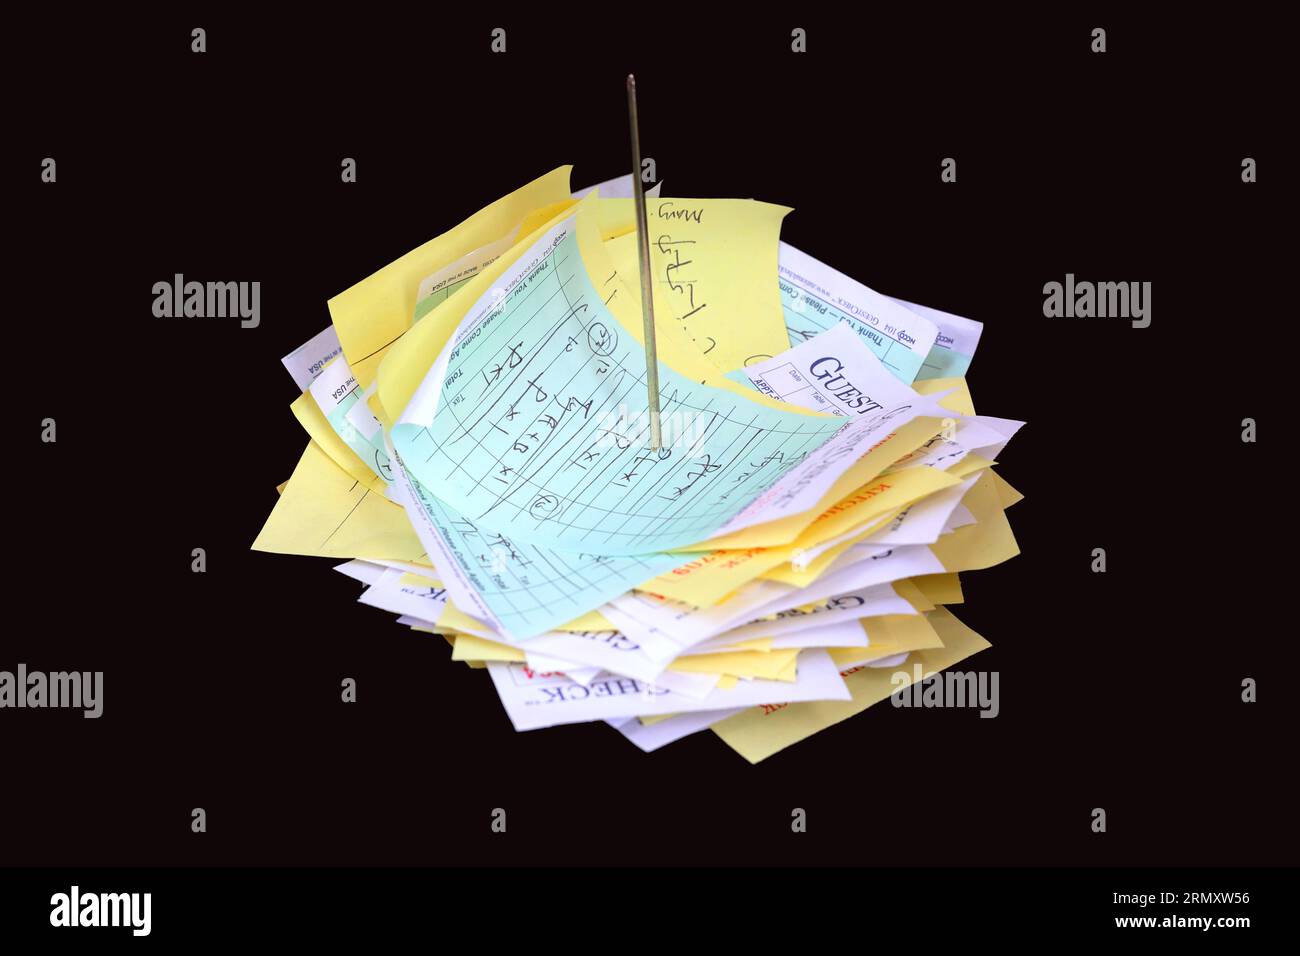 A straight rod, spiked memo holder holding food orders and receipts isolated on a black background. Stock Photo